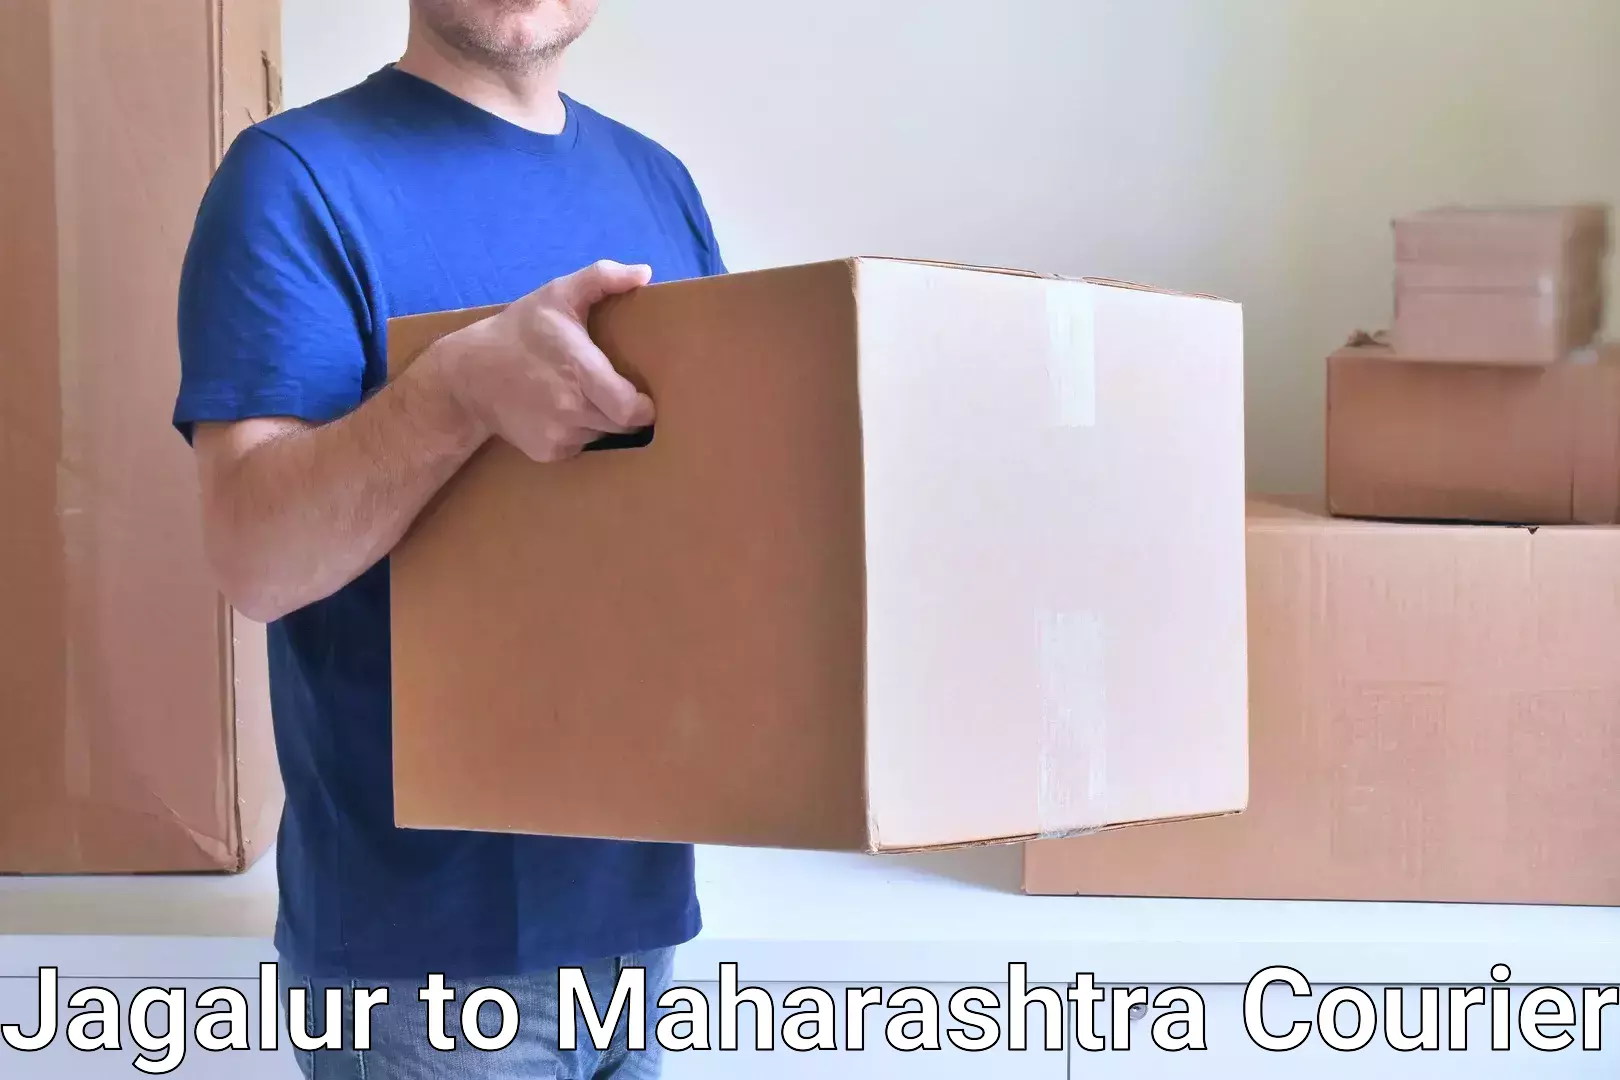 Quality courier services in Jagalur to Bhokar